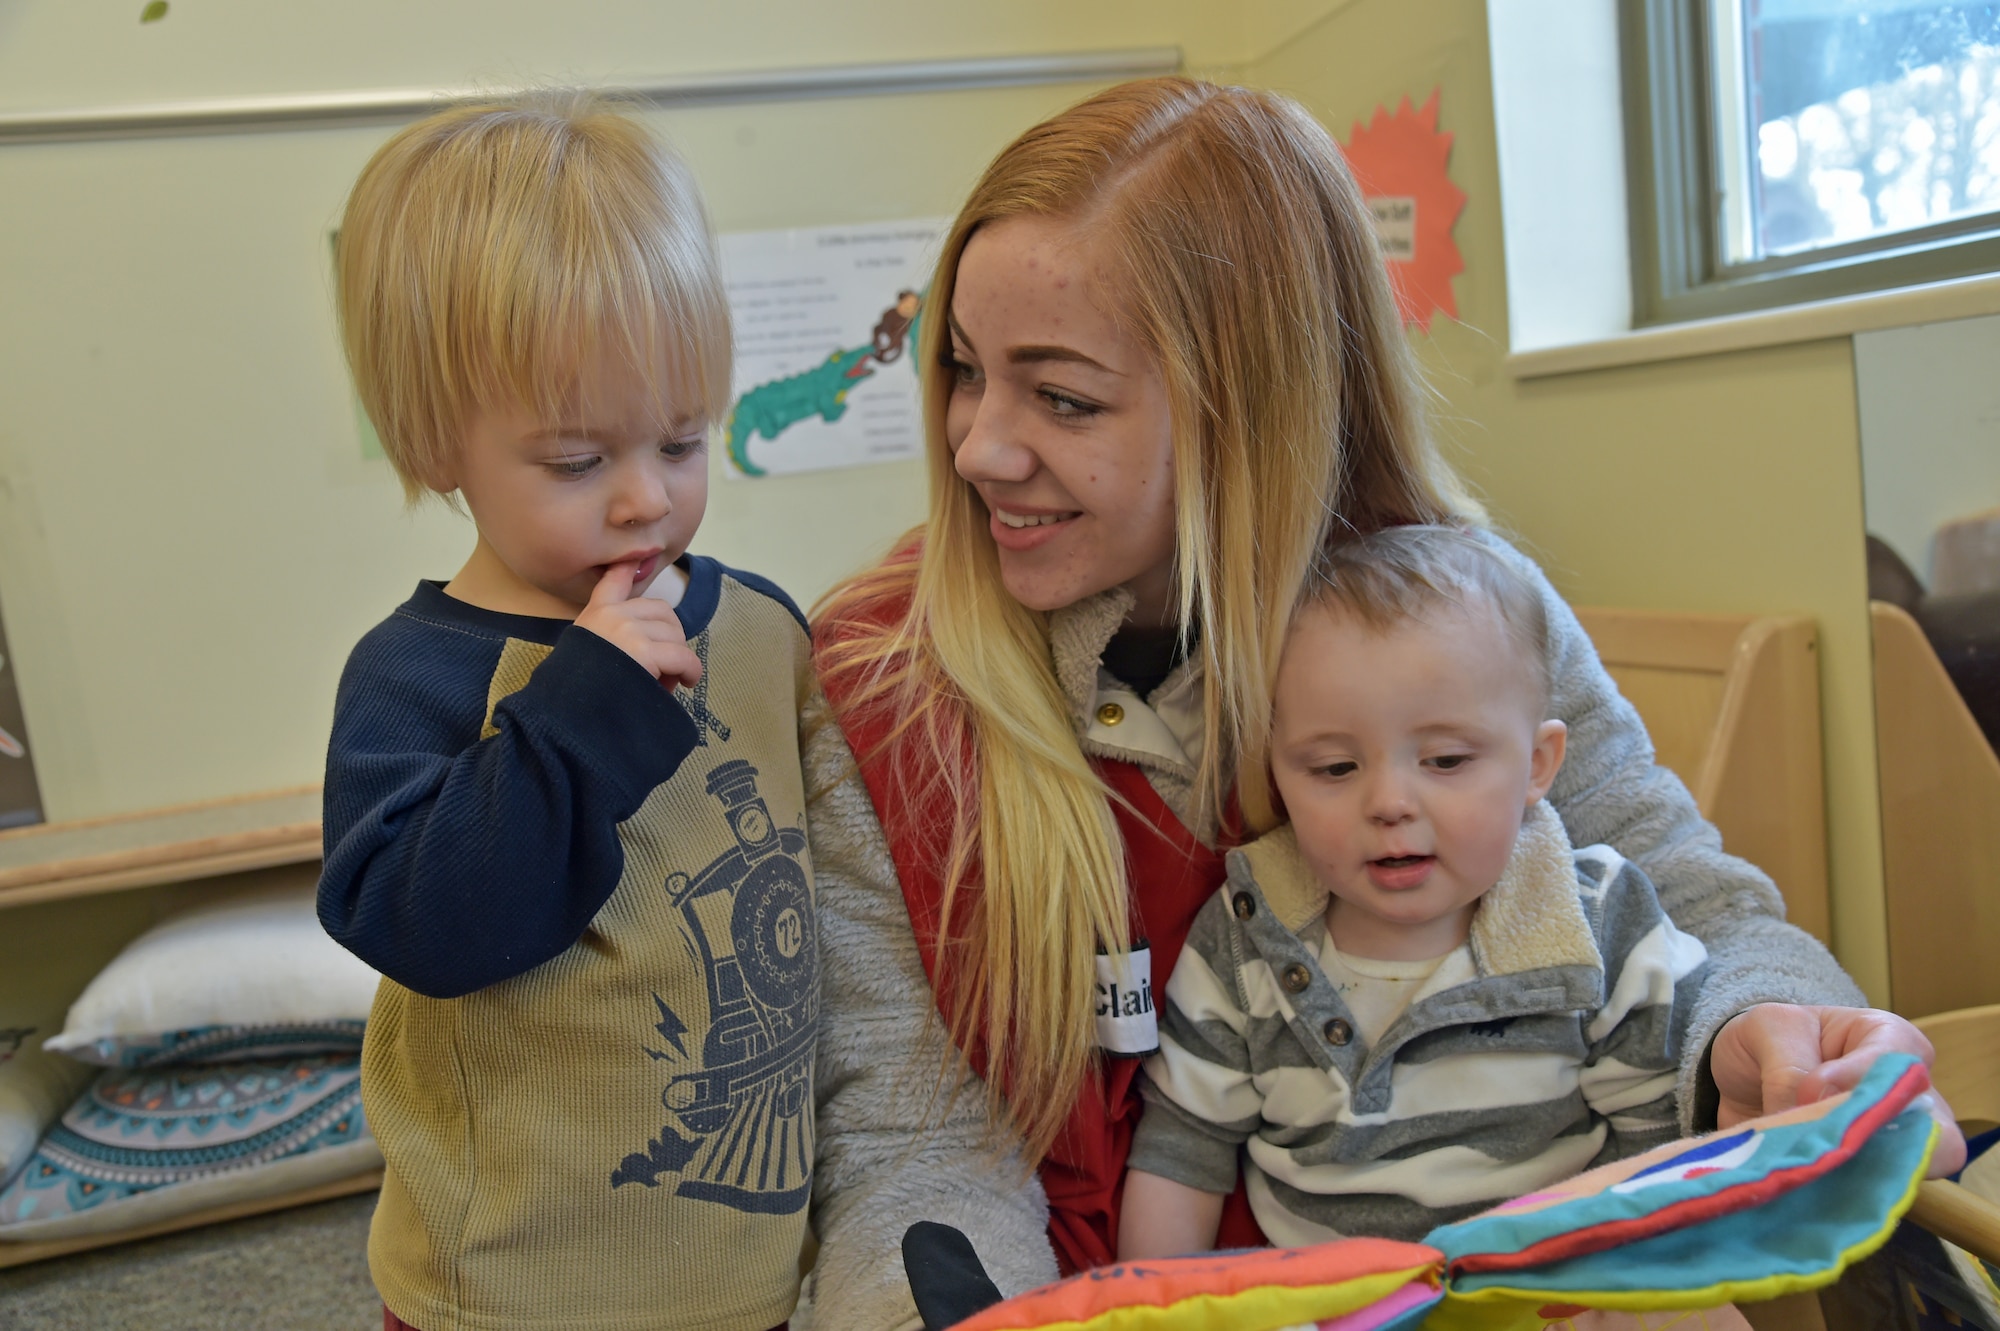 Claire Silver (center), 319th Force Support Squadron, child development program assistant, reads with toddlers at the Child Development Center on Grand Forks Air Force Base, N.D., March 10, 2020. Effective 1 April, the CDC will change its hours to open at 0700 and will close at 1730. The change is necessary to allow for mandated scheduled breaks for caregivers, curriculum planning and establishes continuity of caregivers in the classrooms. (U.S. Air Force photo by Tech. Sgt. Kamaile Casillas)